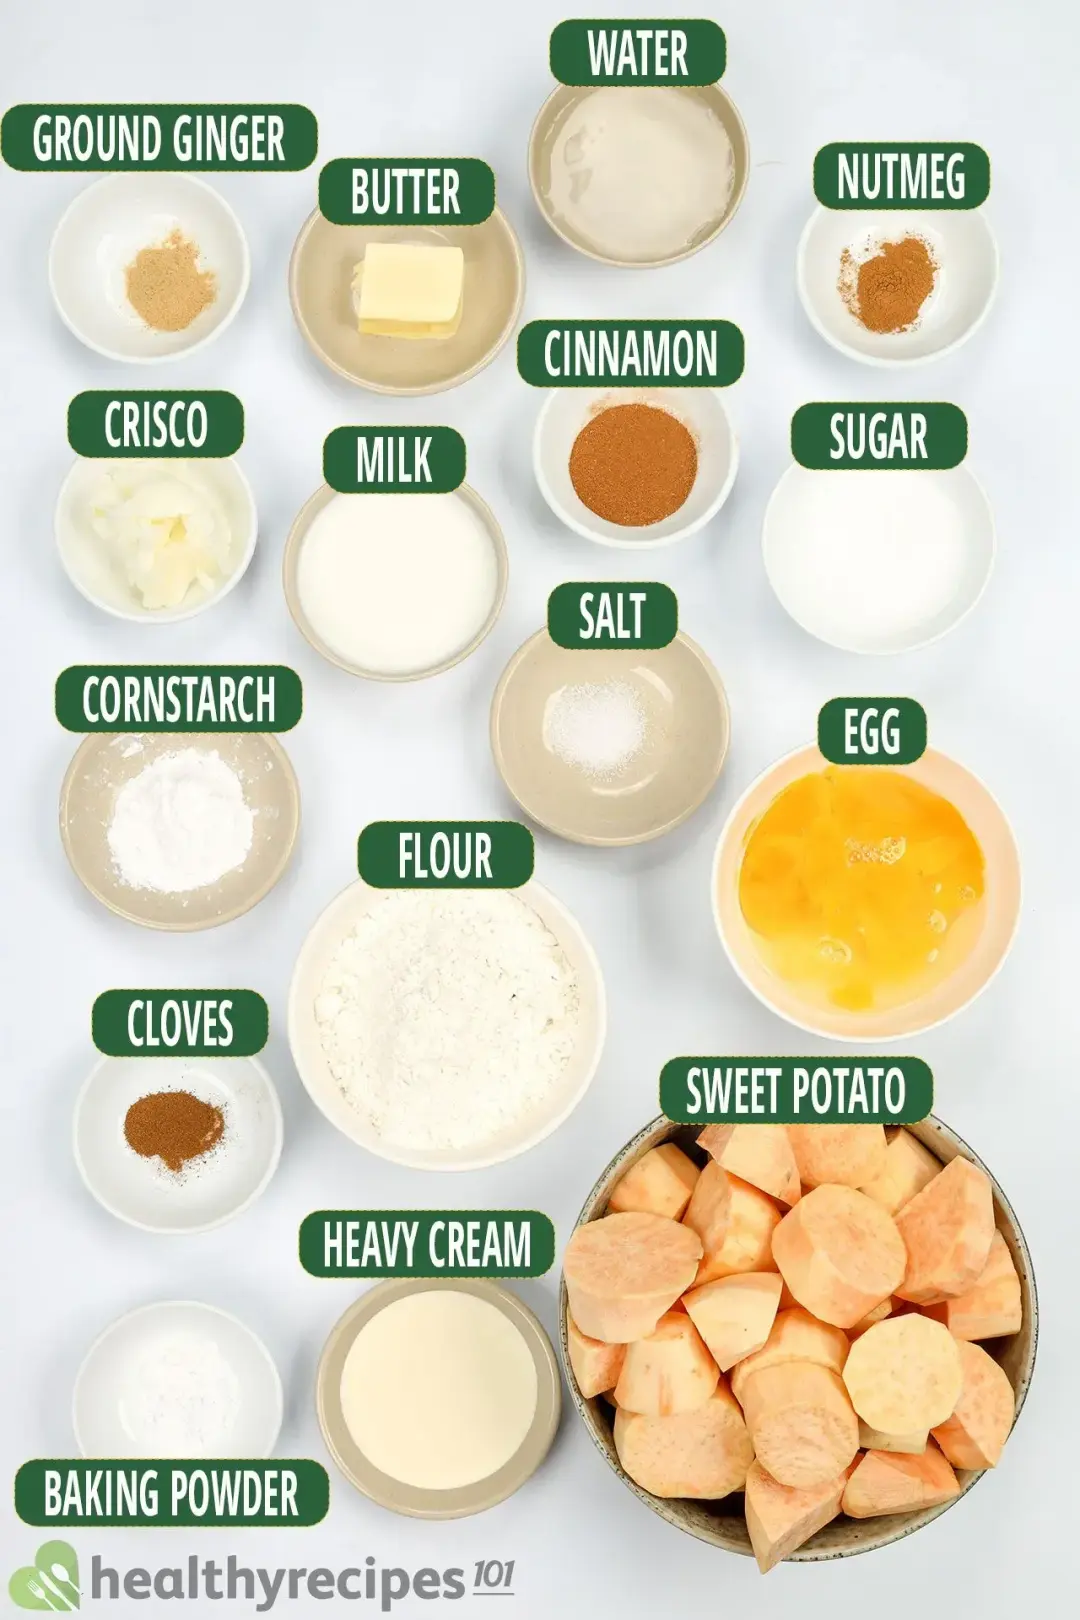 ingredients for Sweet Potato Pie: sweet potato cubed, flour, eggs, heavy cream and other spices